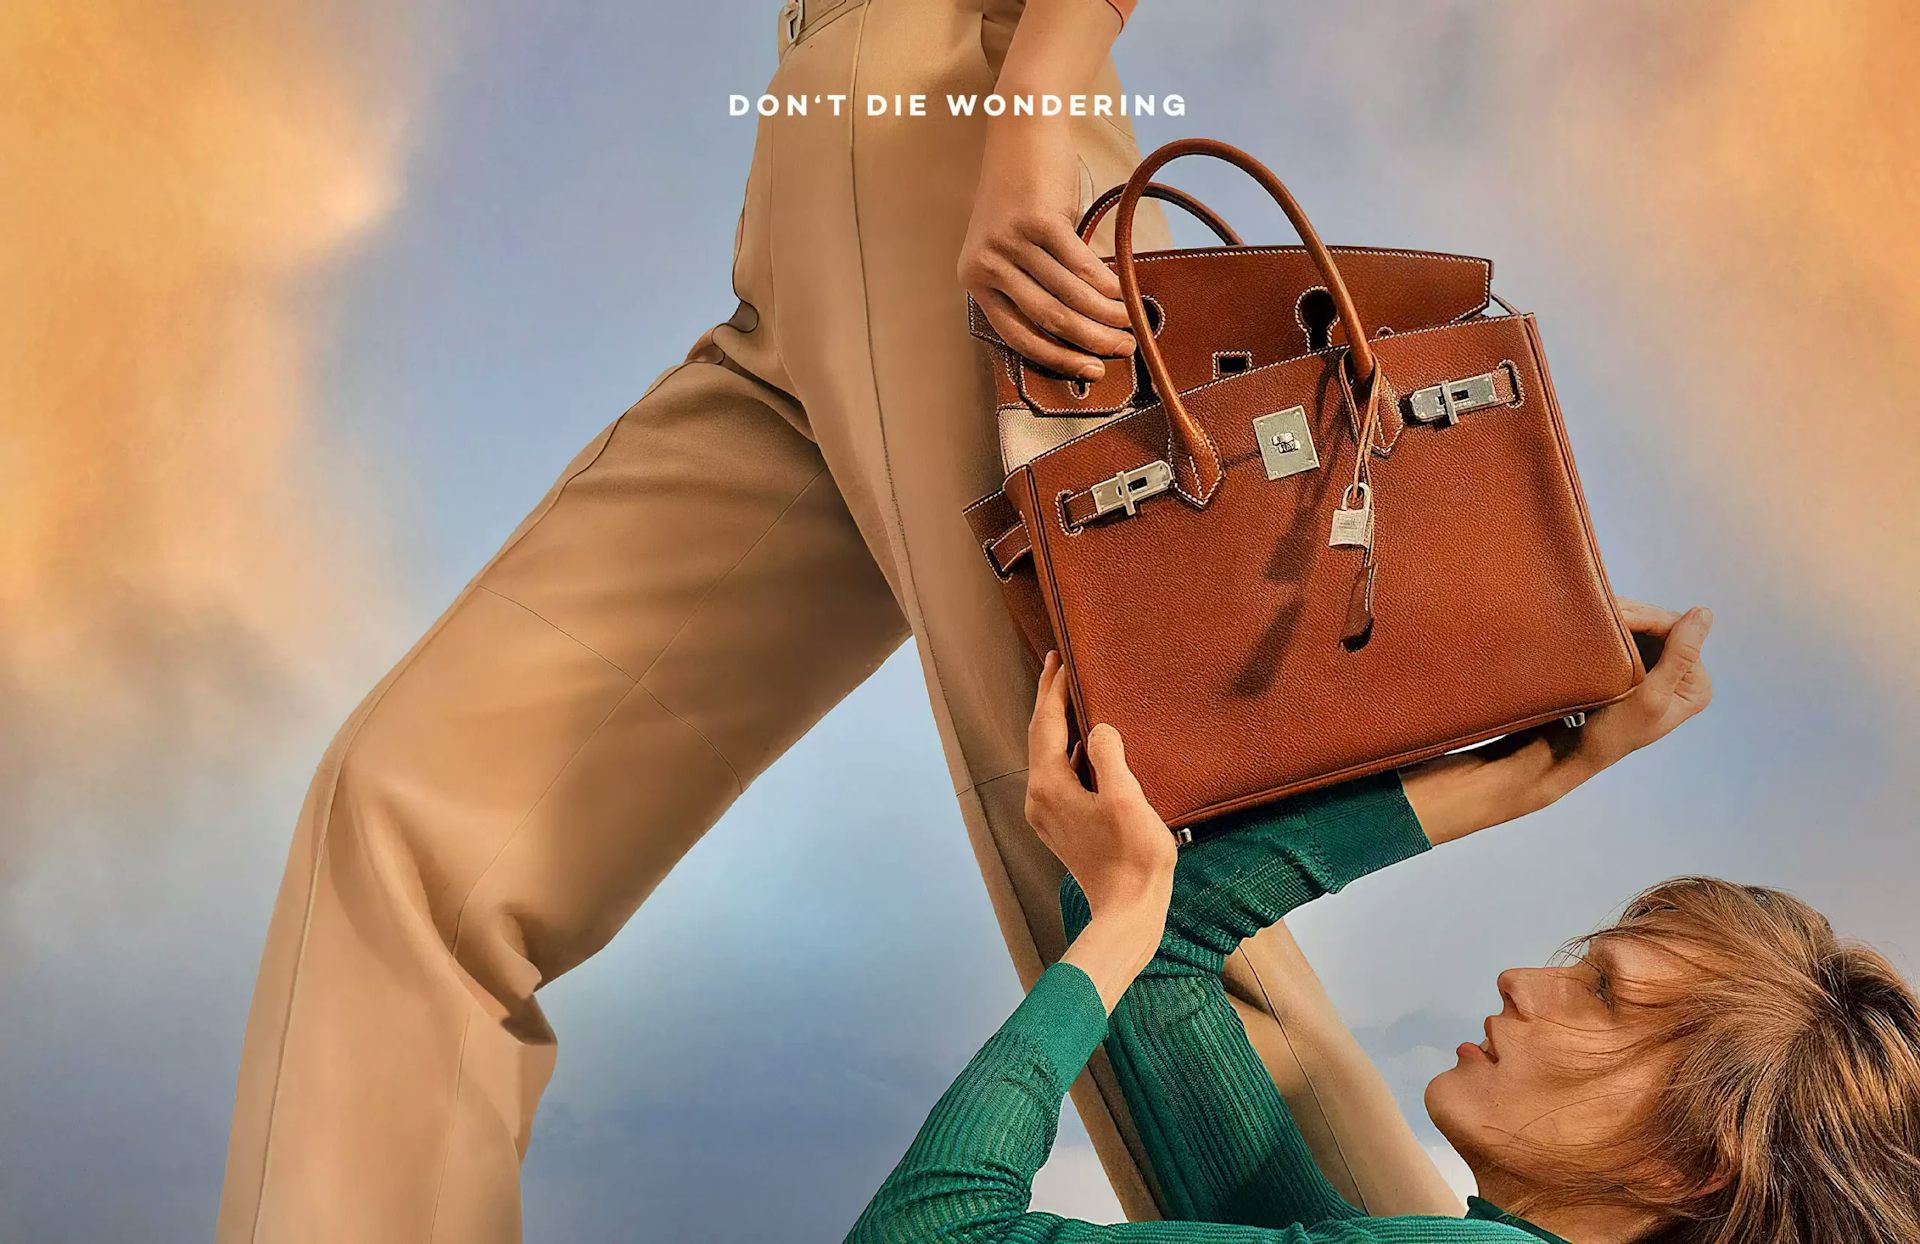 This Birkin NFT ban paints a bleak future for non-fungibles